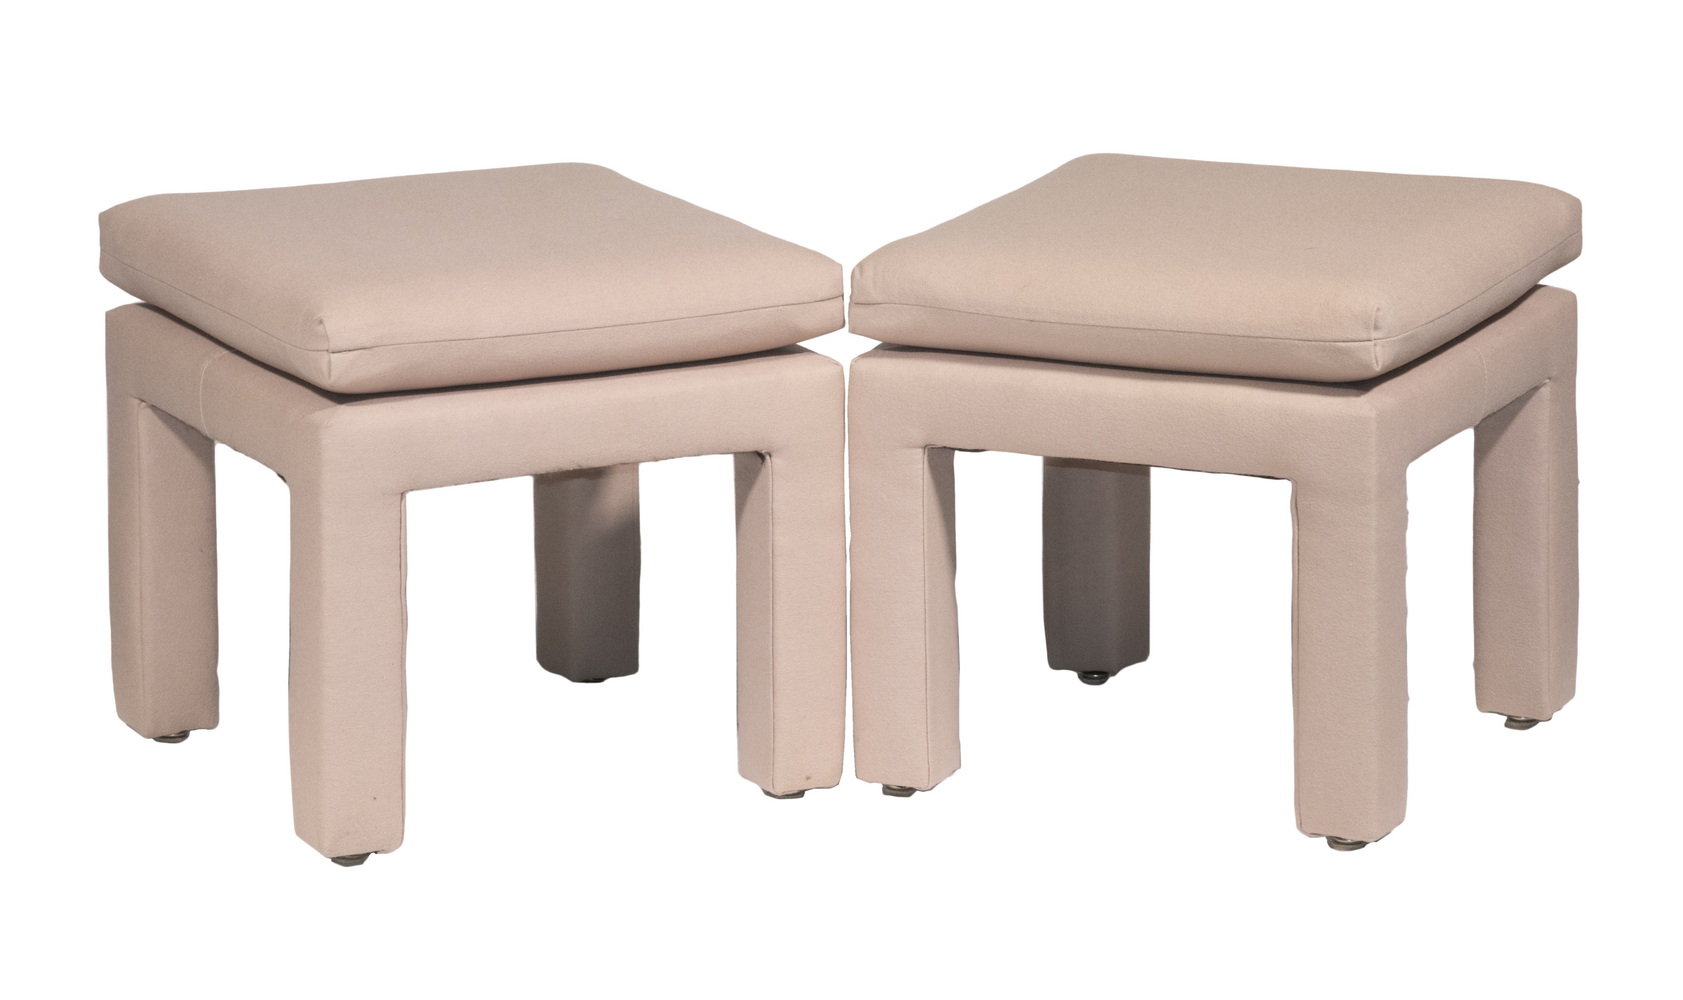 A PAIR OF MODERN OTTOMANS BY DREXEL